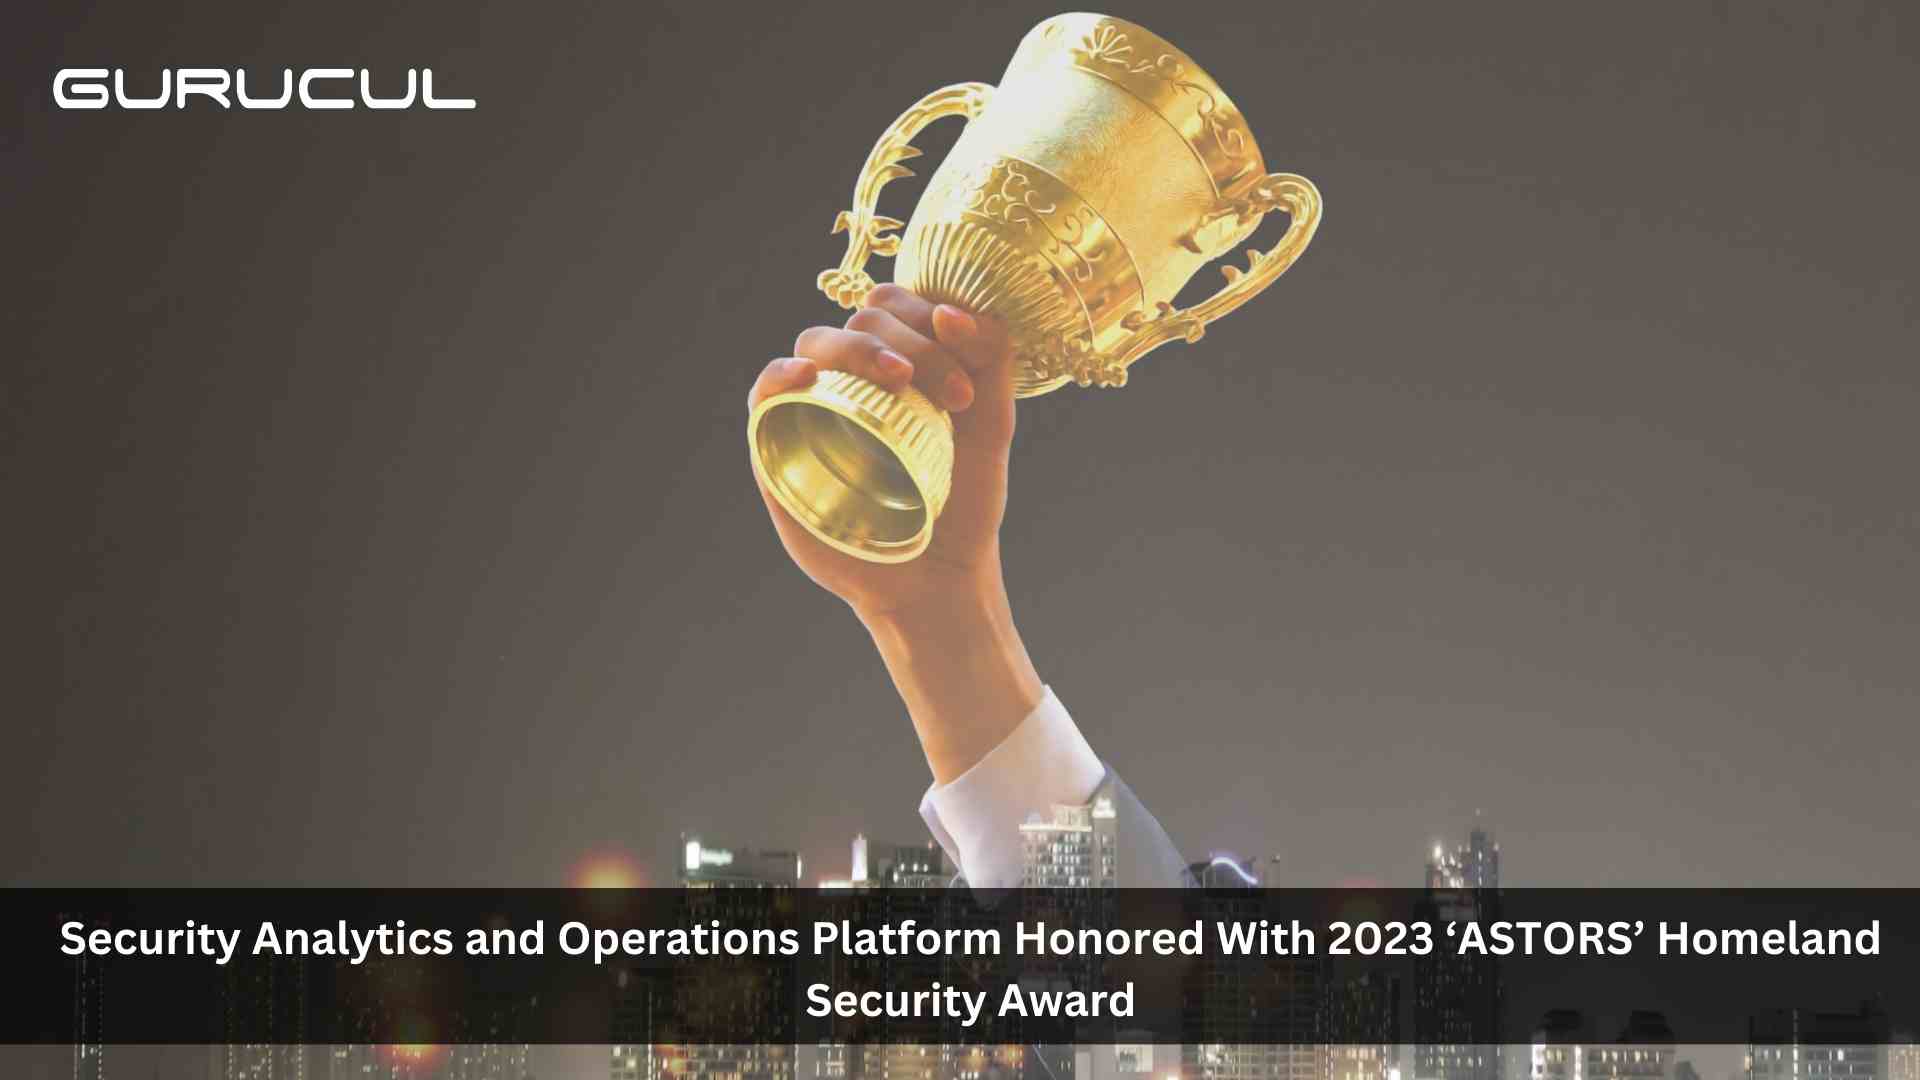 Gurucul Security Analytics and Operations Platform Honored with 2023 ‘ASTORS’ Homeland Security Award